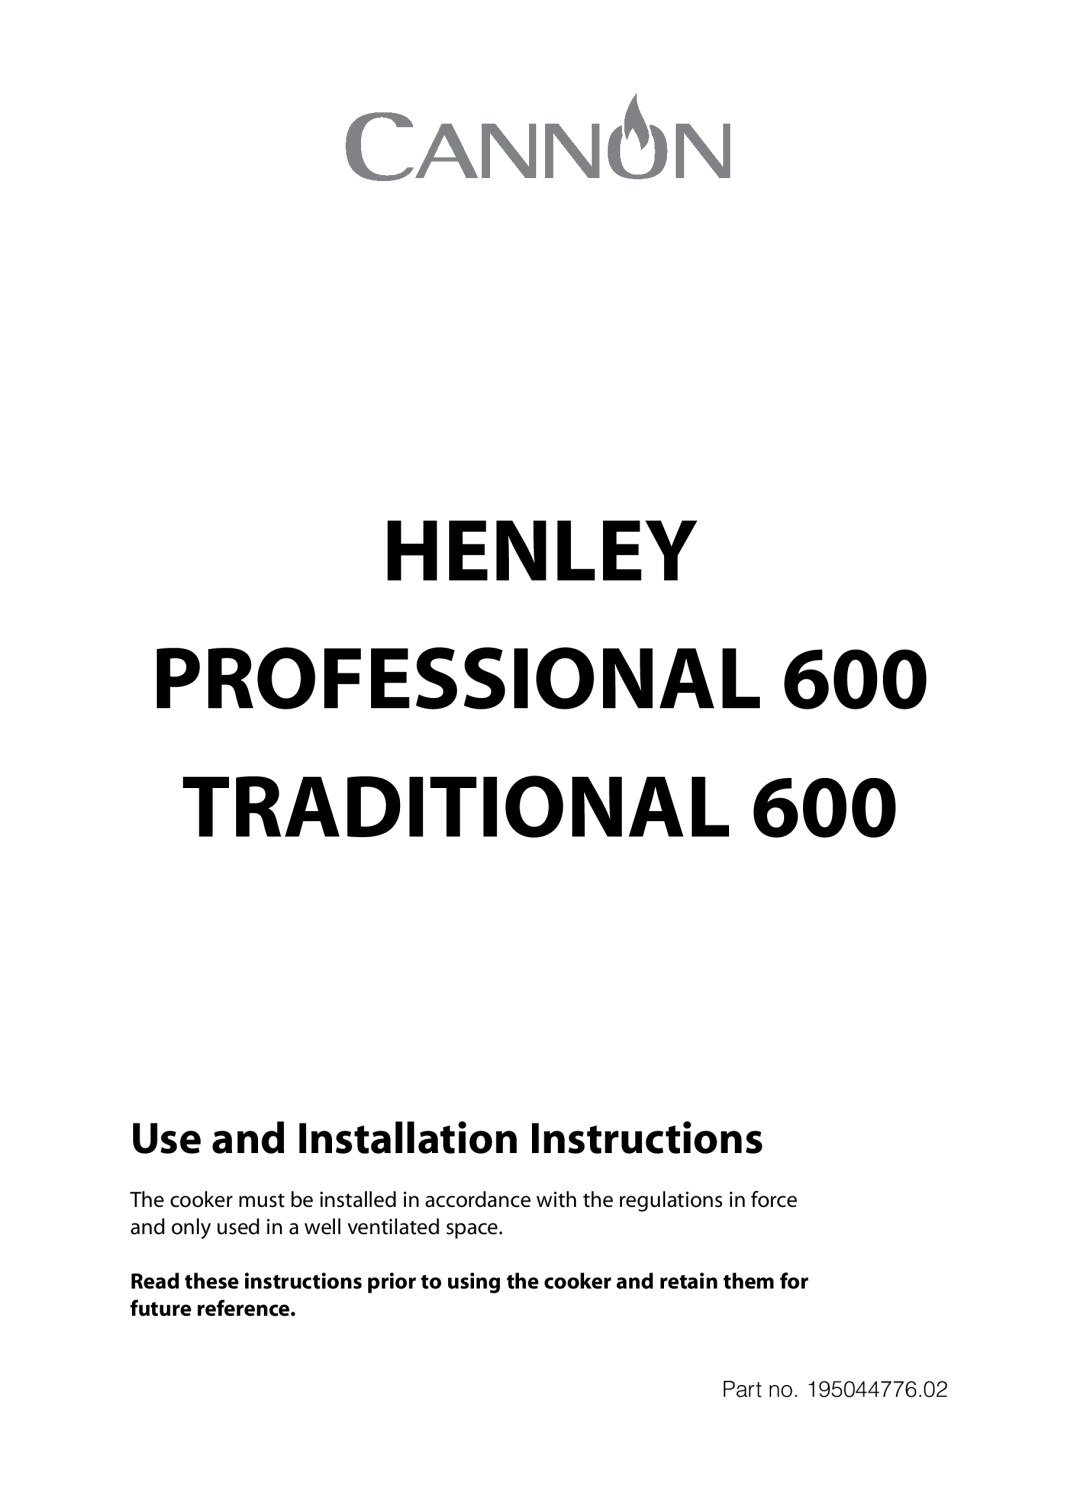 Cannon 10682G, 10685G, 10476G installation instructions Use and Installation Instructions, Henley Professional Traditional 